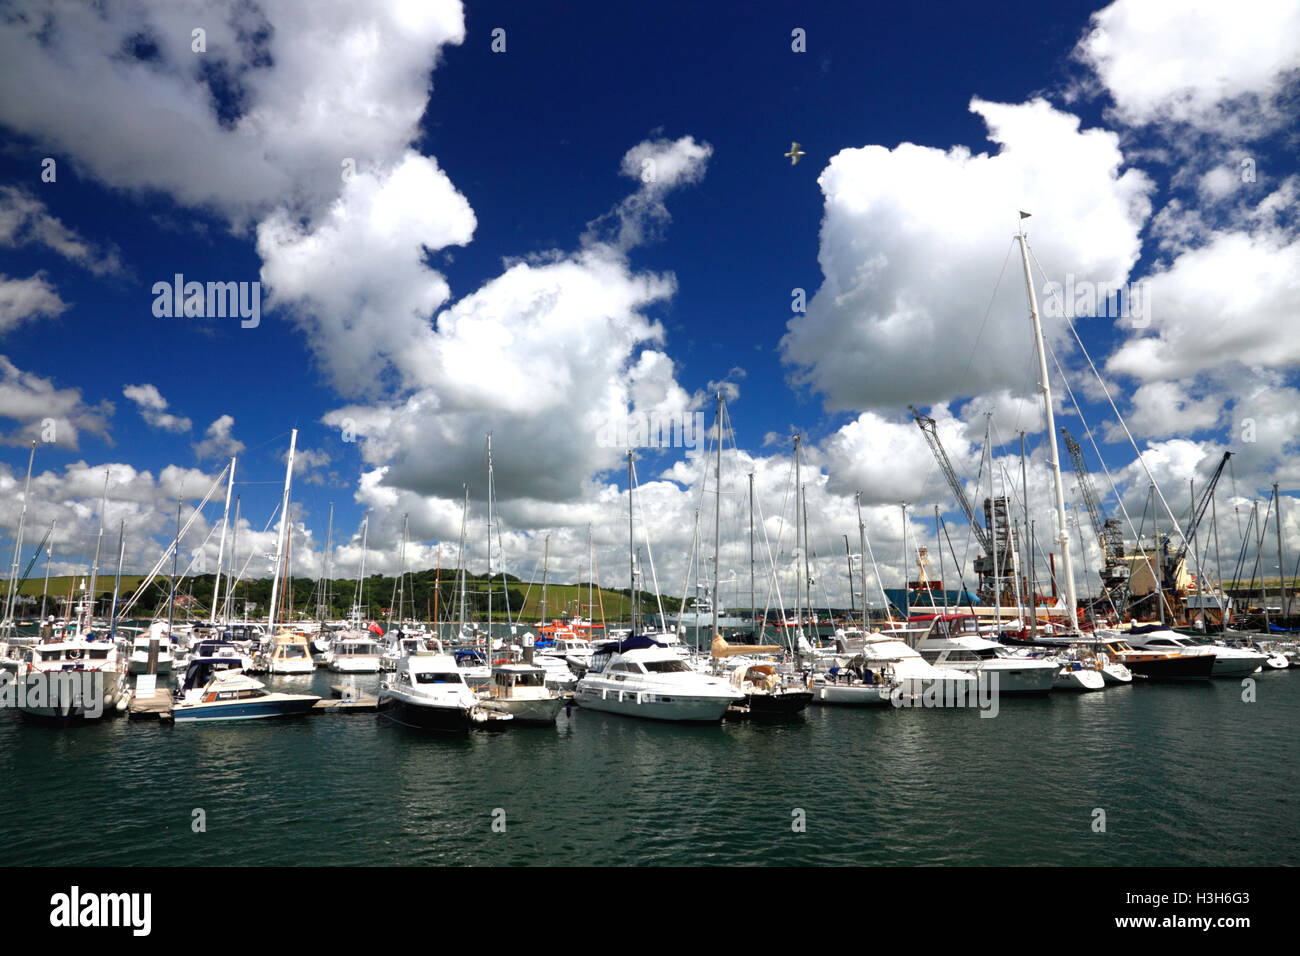 Boats moored in the harbour at Falmouth, Cornwall. Stock Photo